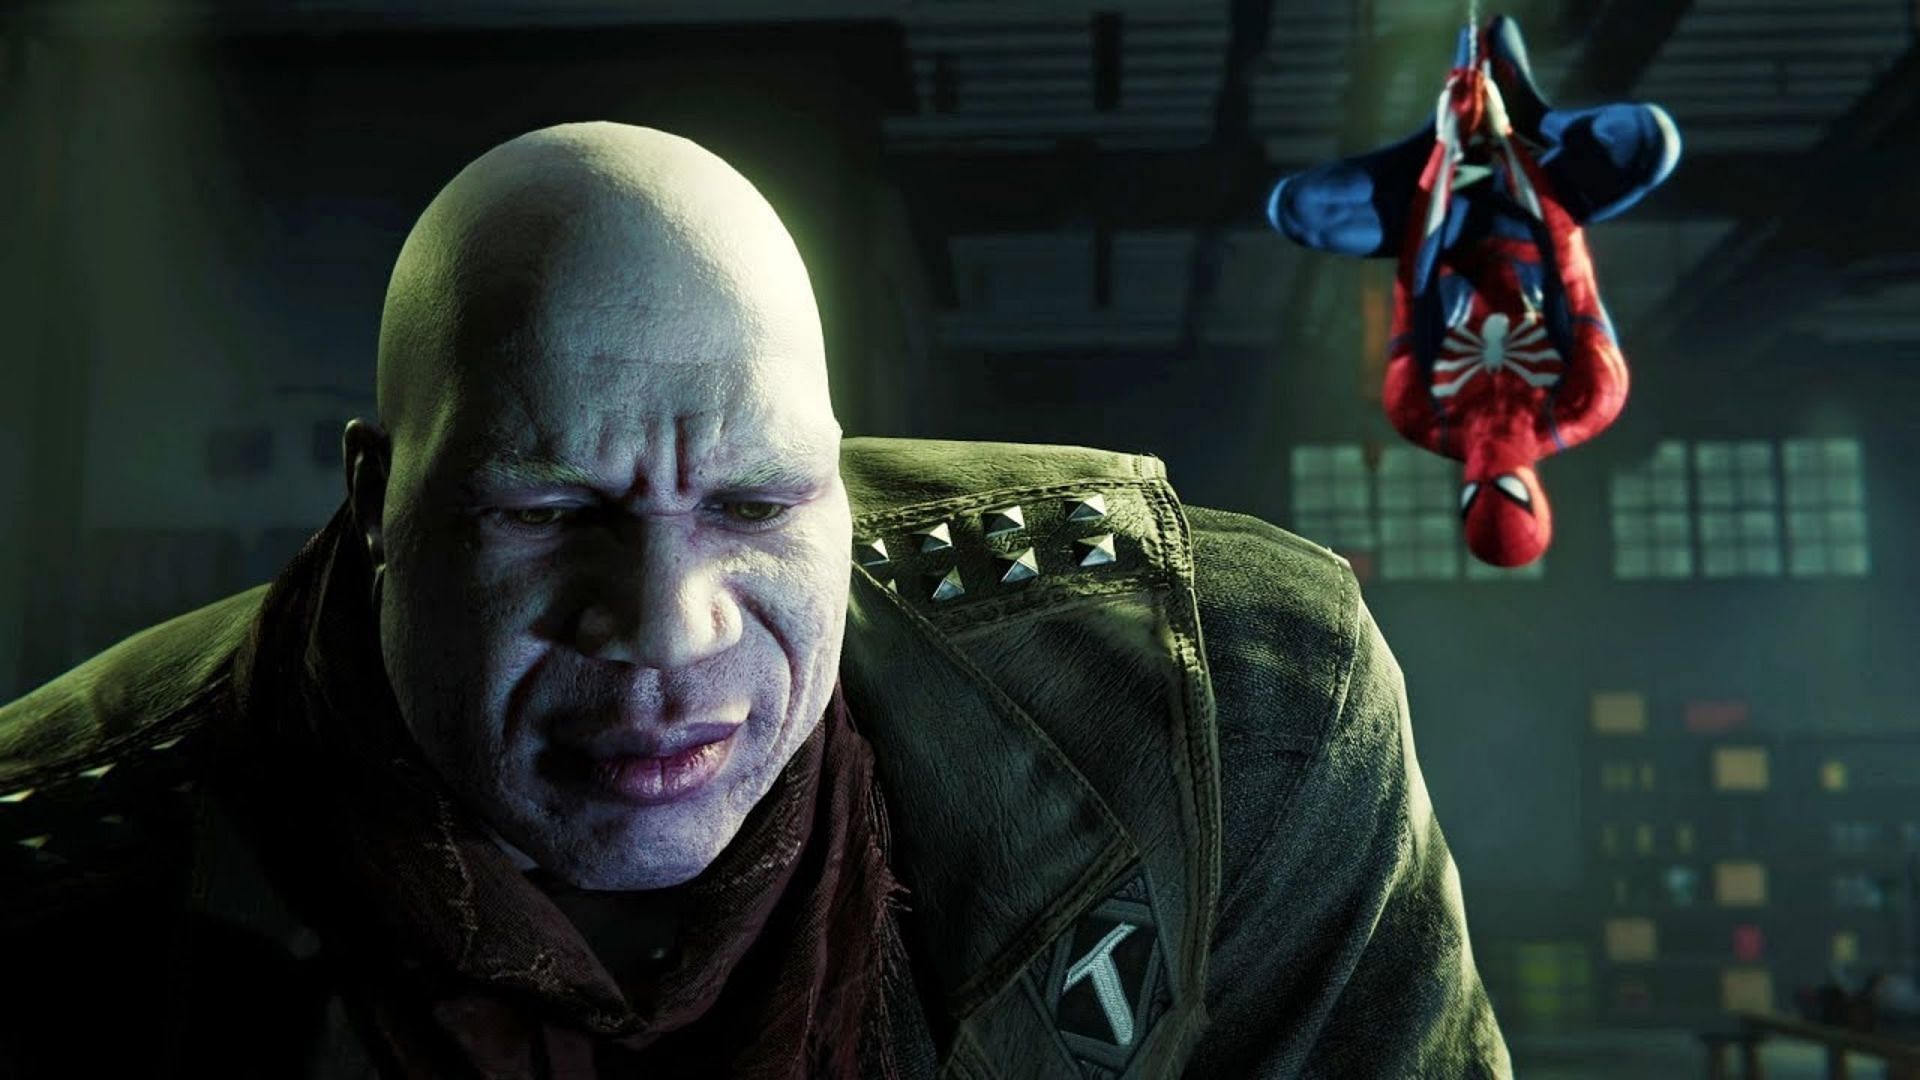 Spider-Man 2: PlayStation Confirms 9 Villains Set to Appear